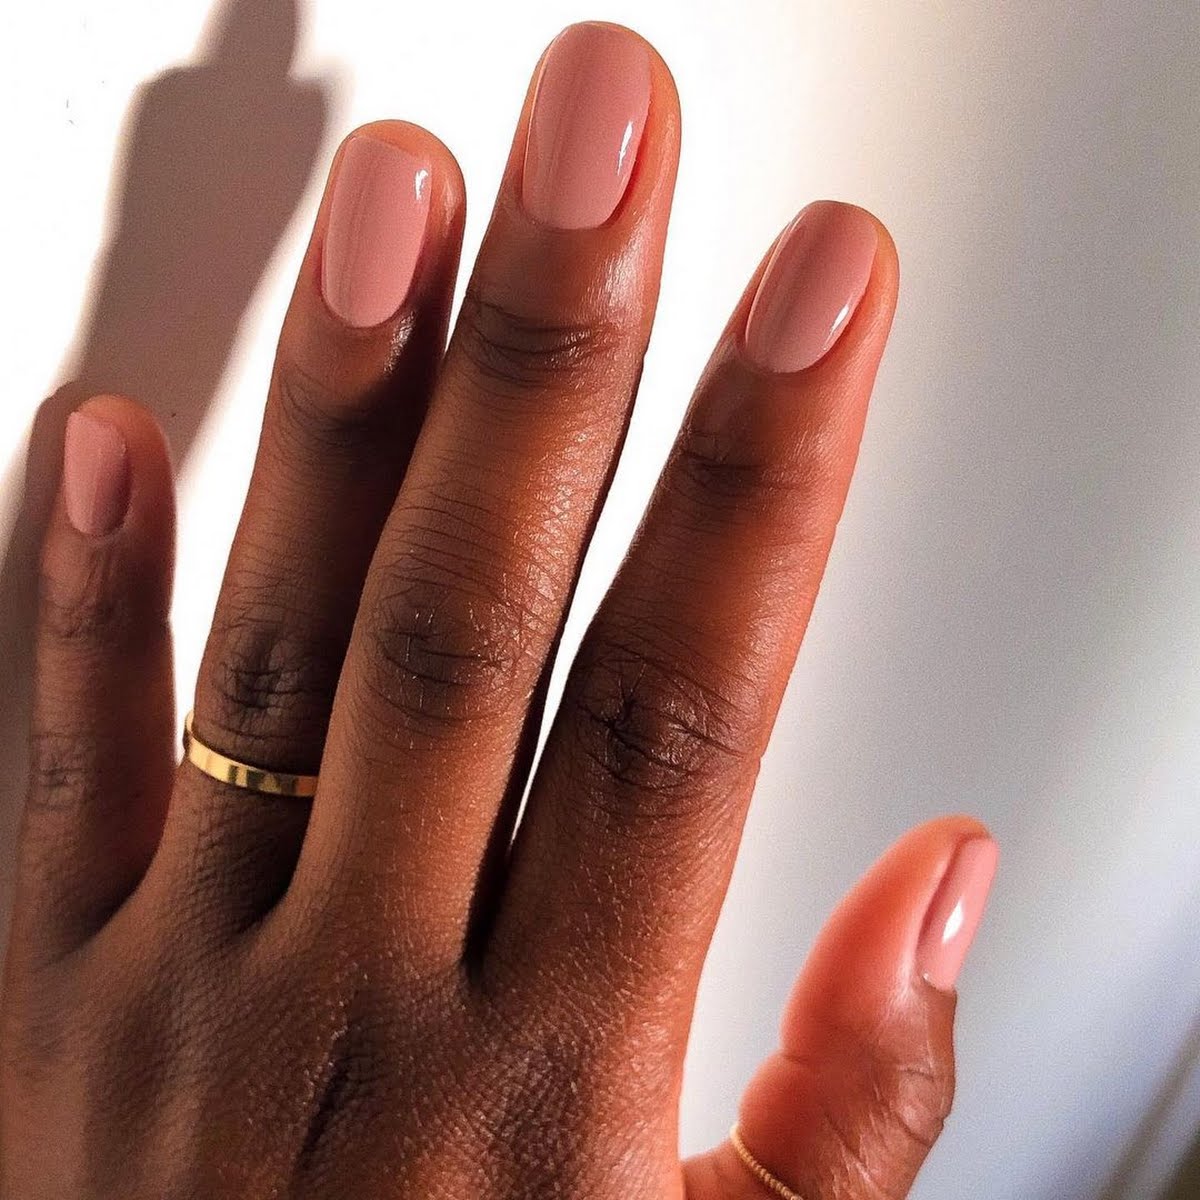 For Strong Nails You Need This Treatment Every Three Months